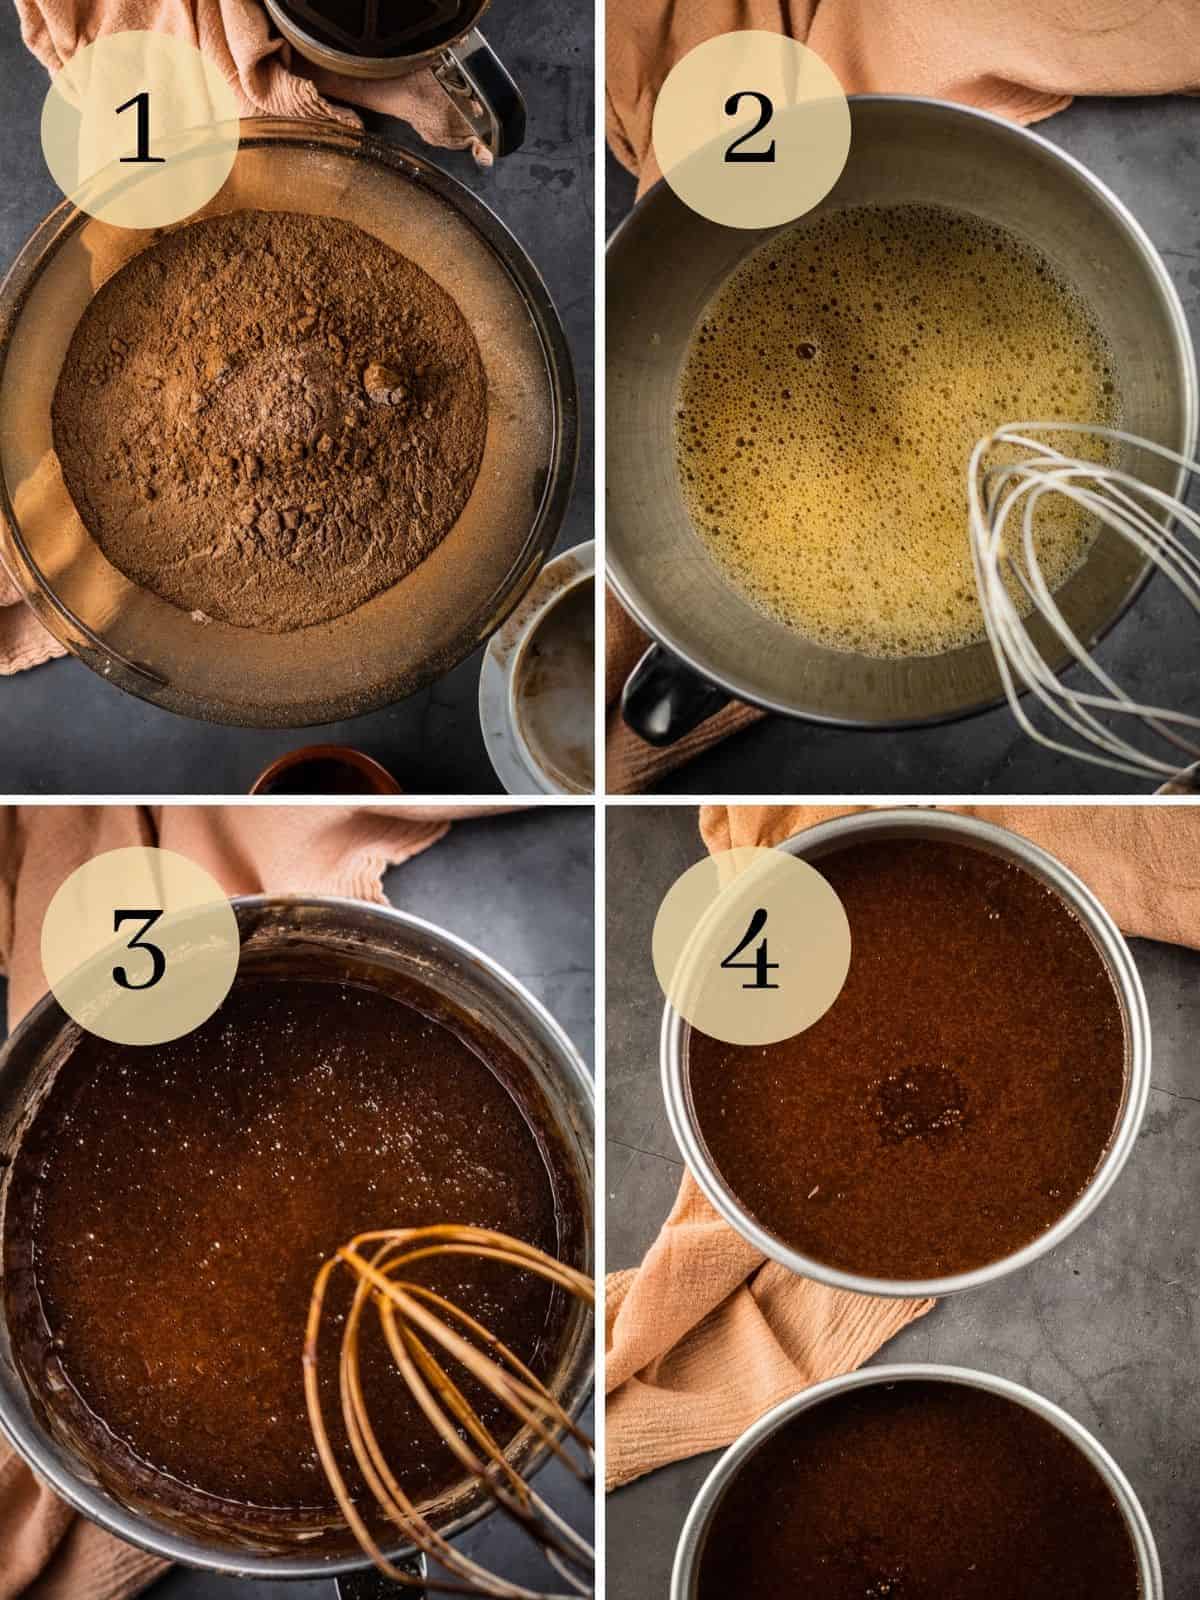 sifted dry ingredients, mixed wet ingredients, finished batter and chocolate batter in cake pans